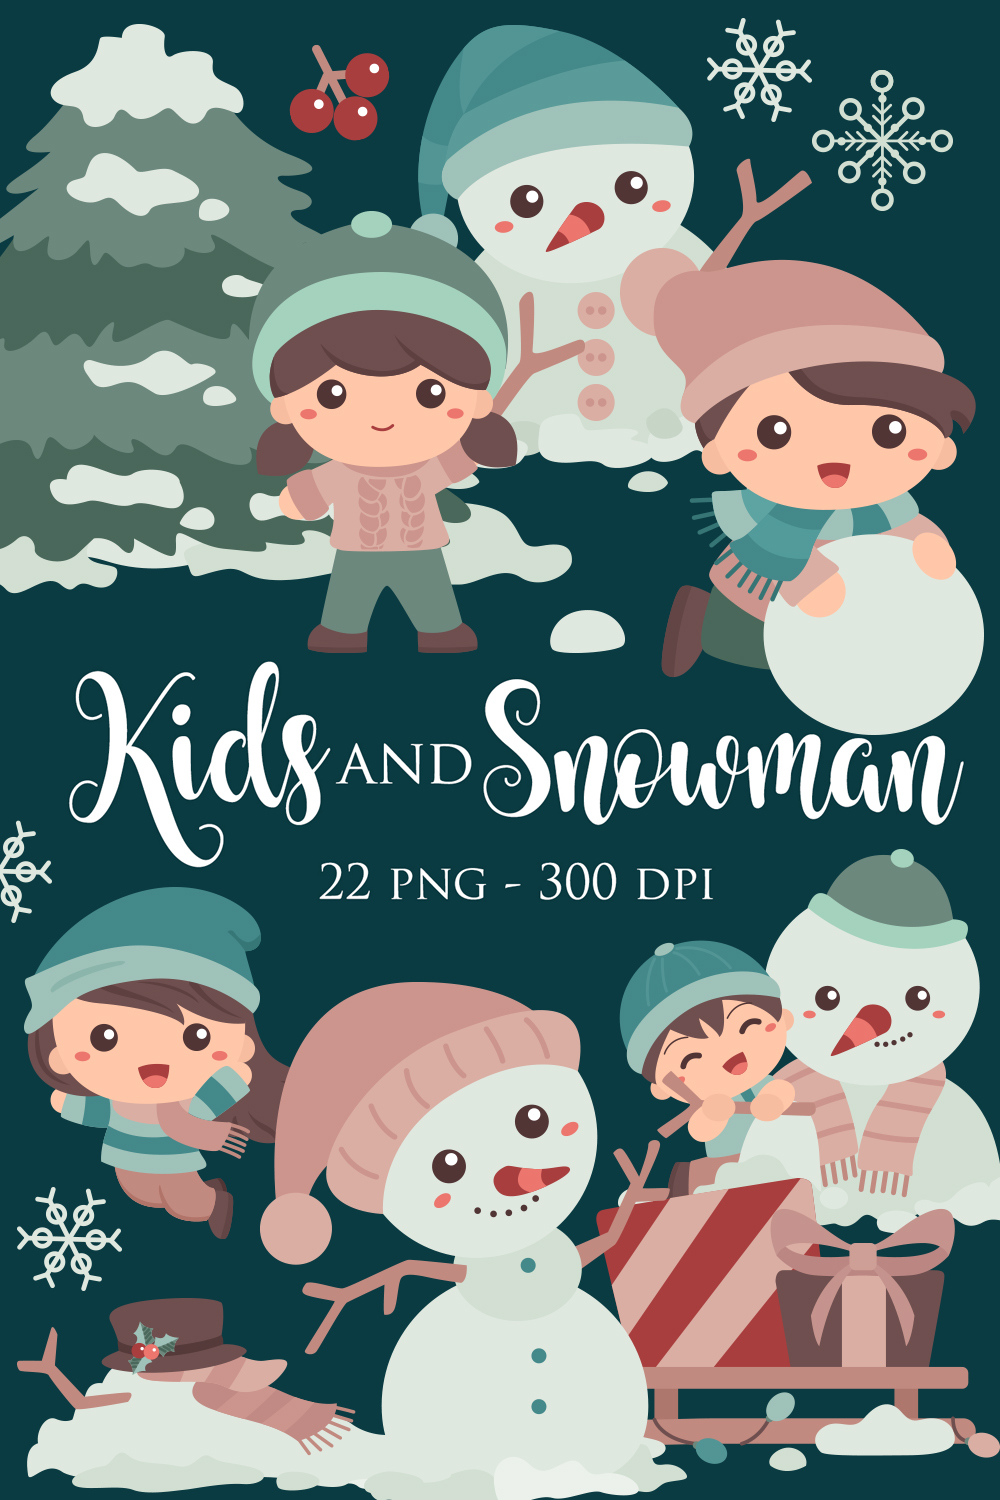 Kids and Snowman Christmas Holiday Nature Tree Snowflake Animal Present Gift Activity Sticker Illustration Vector Clipart Cartoon pinterest preview image.